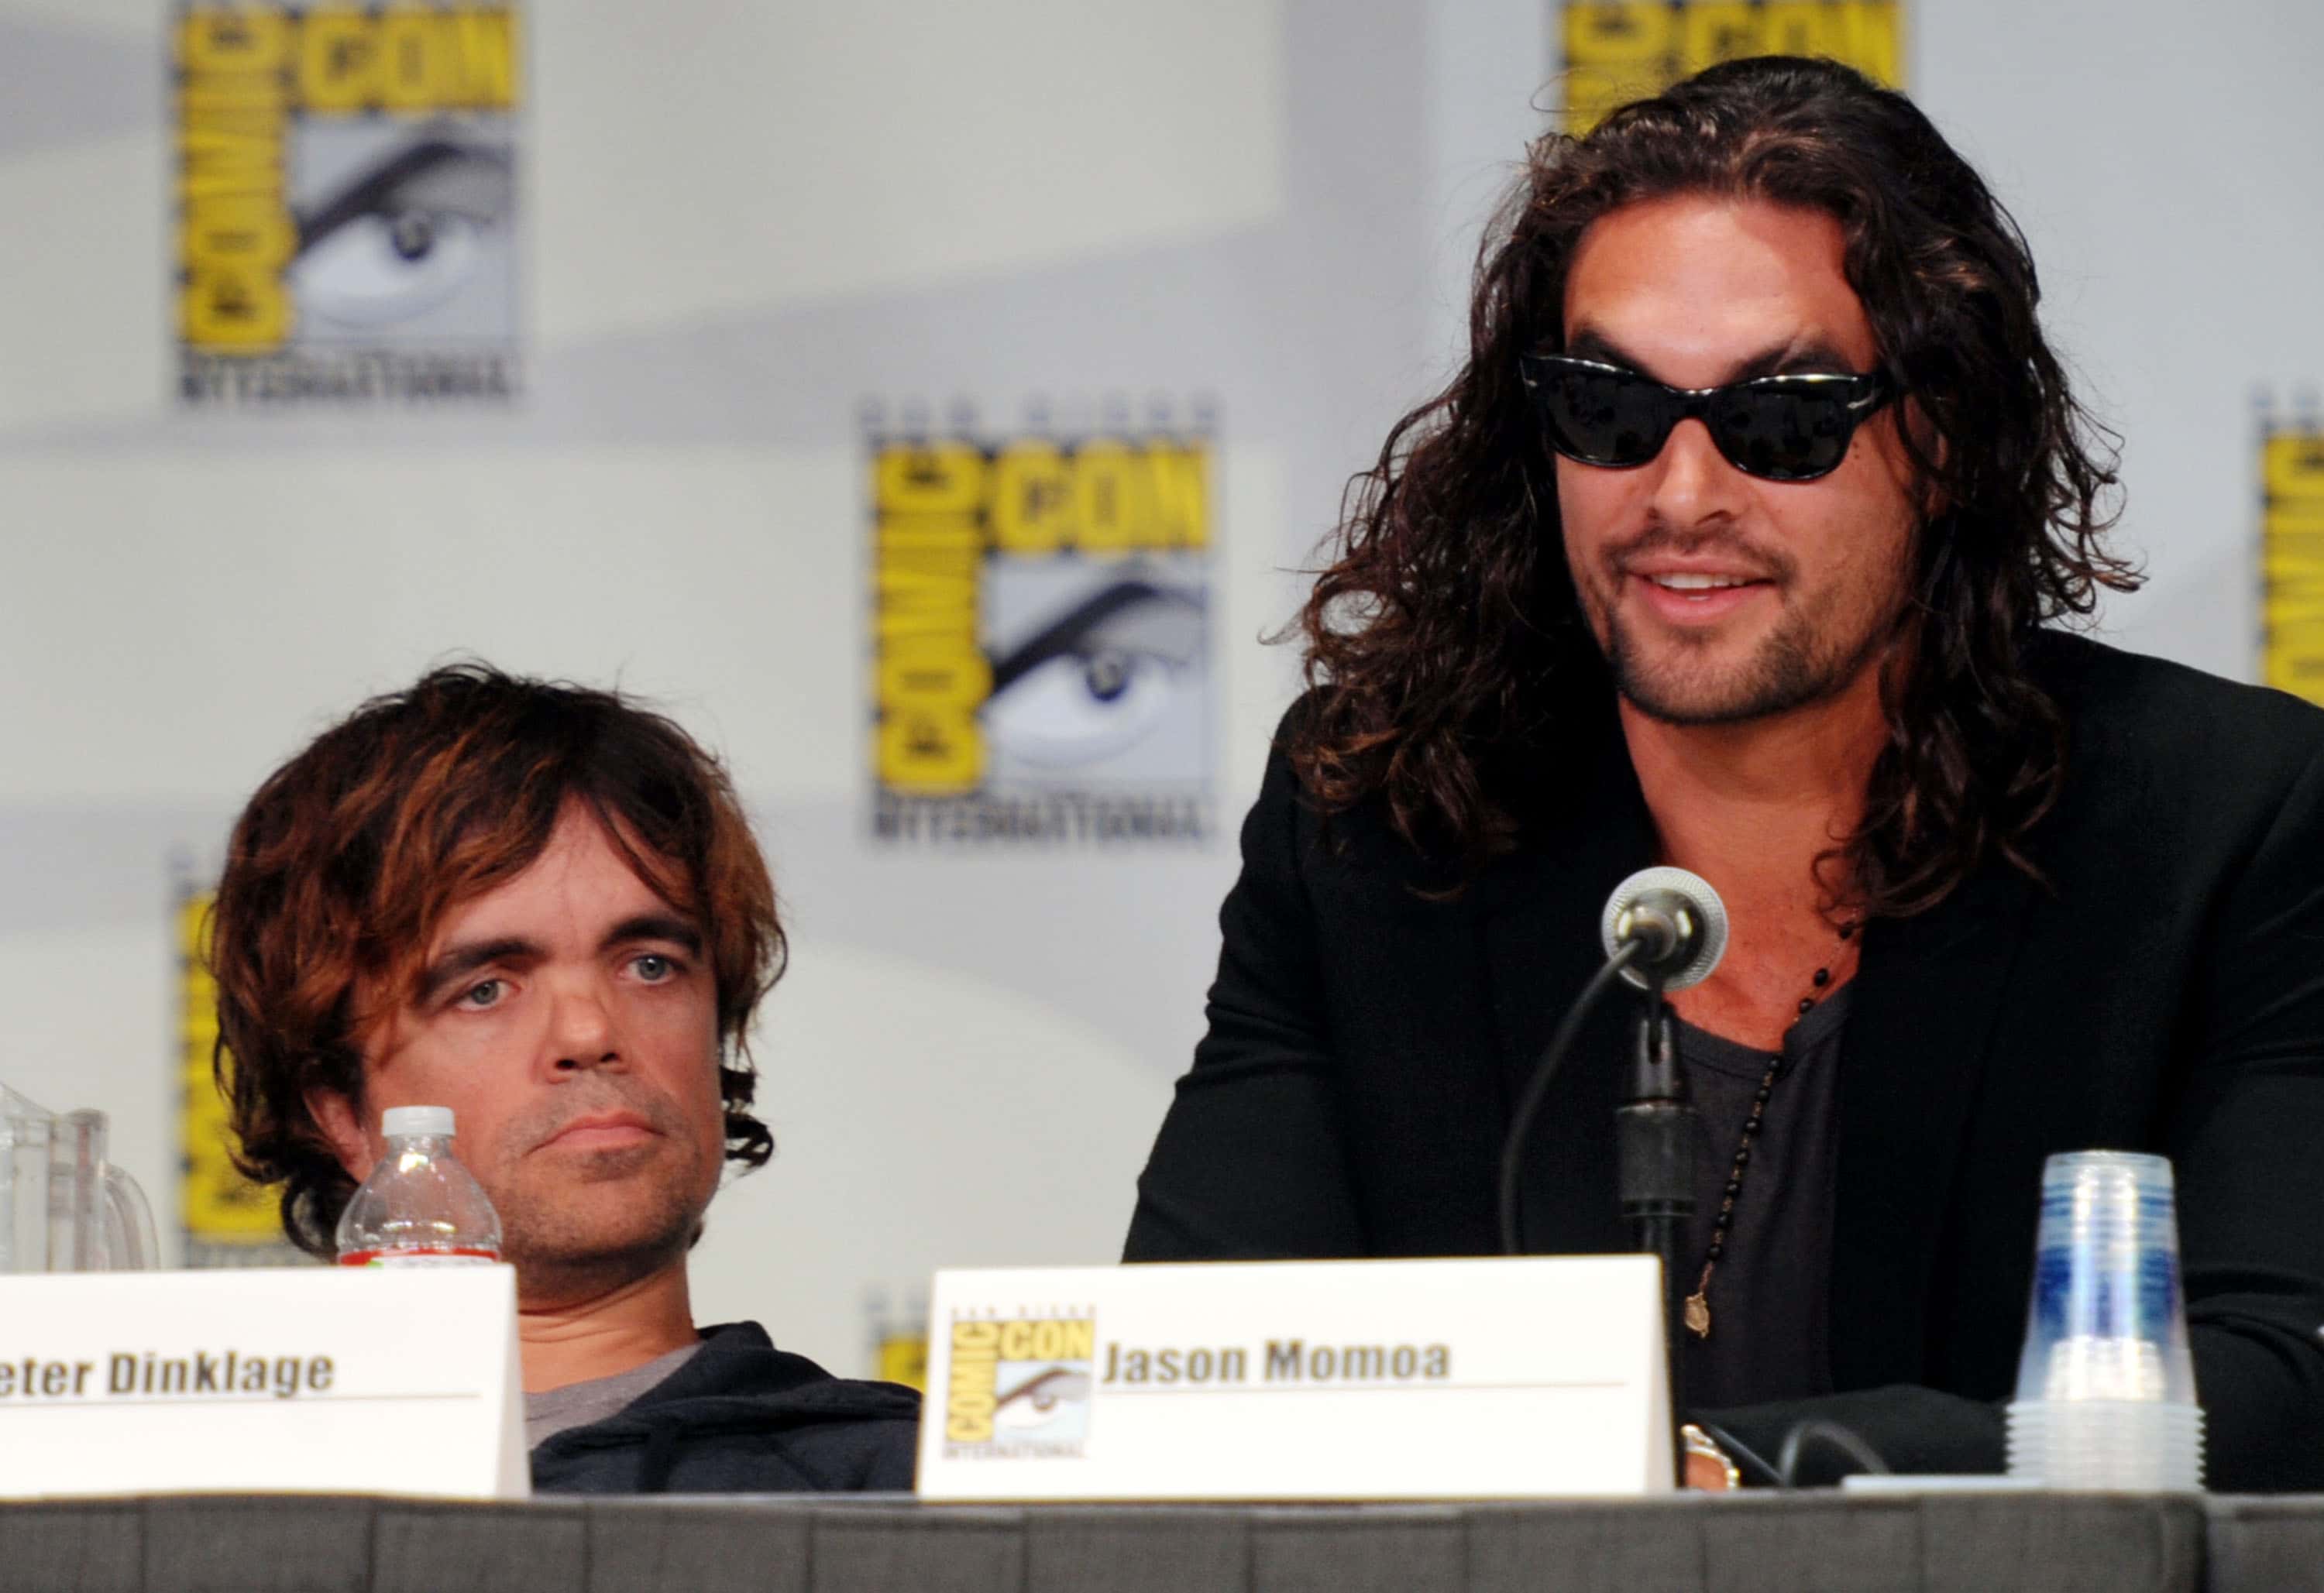 HBO's 'Game Of Thrones' Panel - Comic-Con 2011. Actors Peter Dinklage and Jason Momoa.